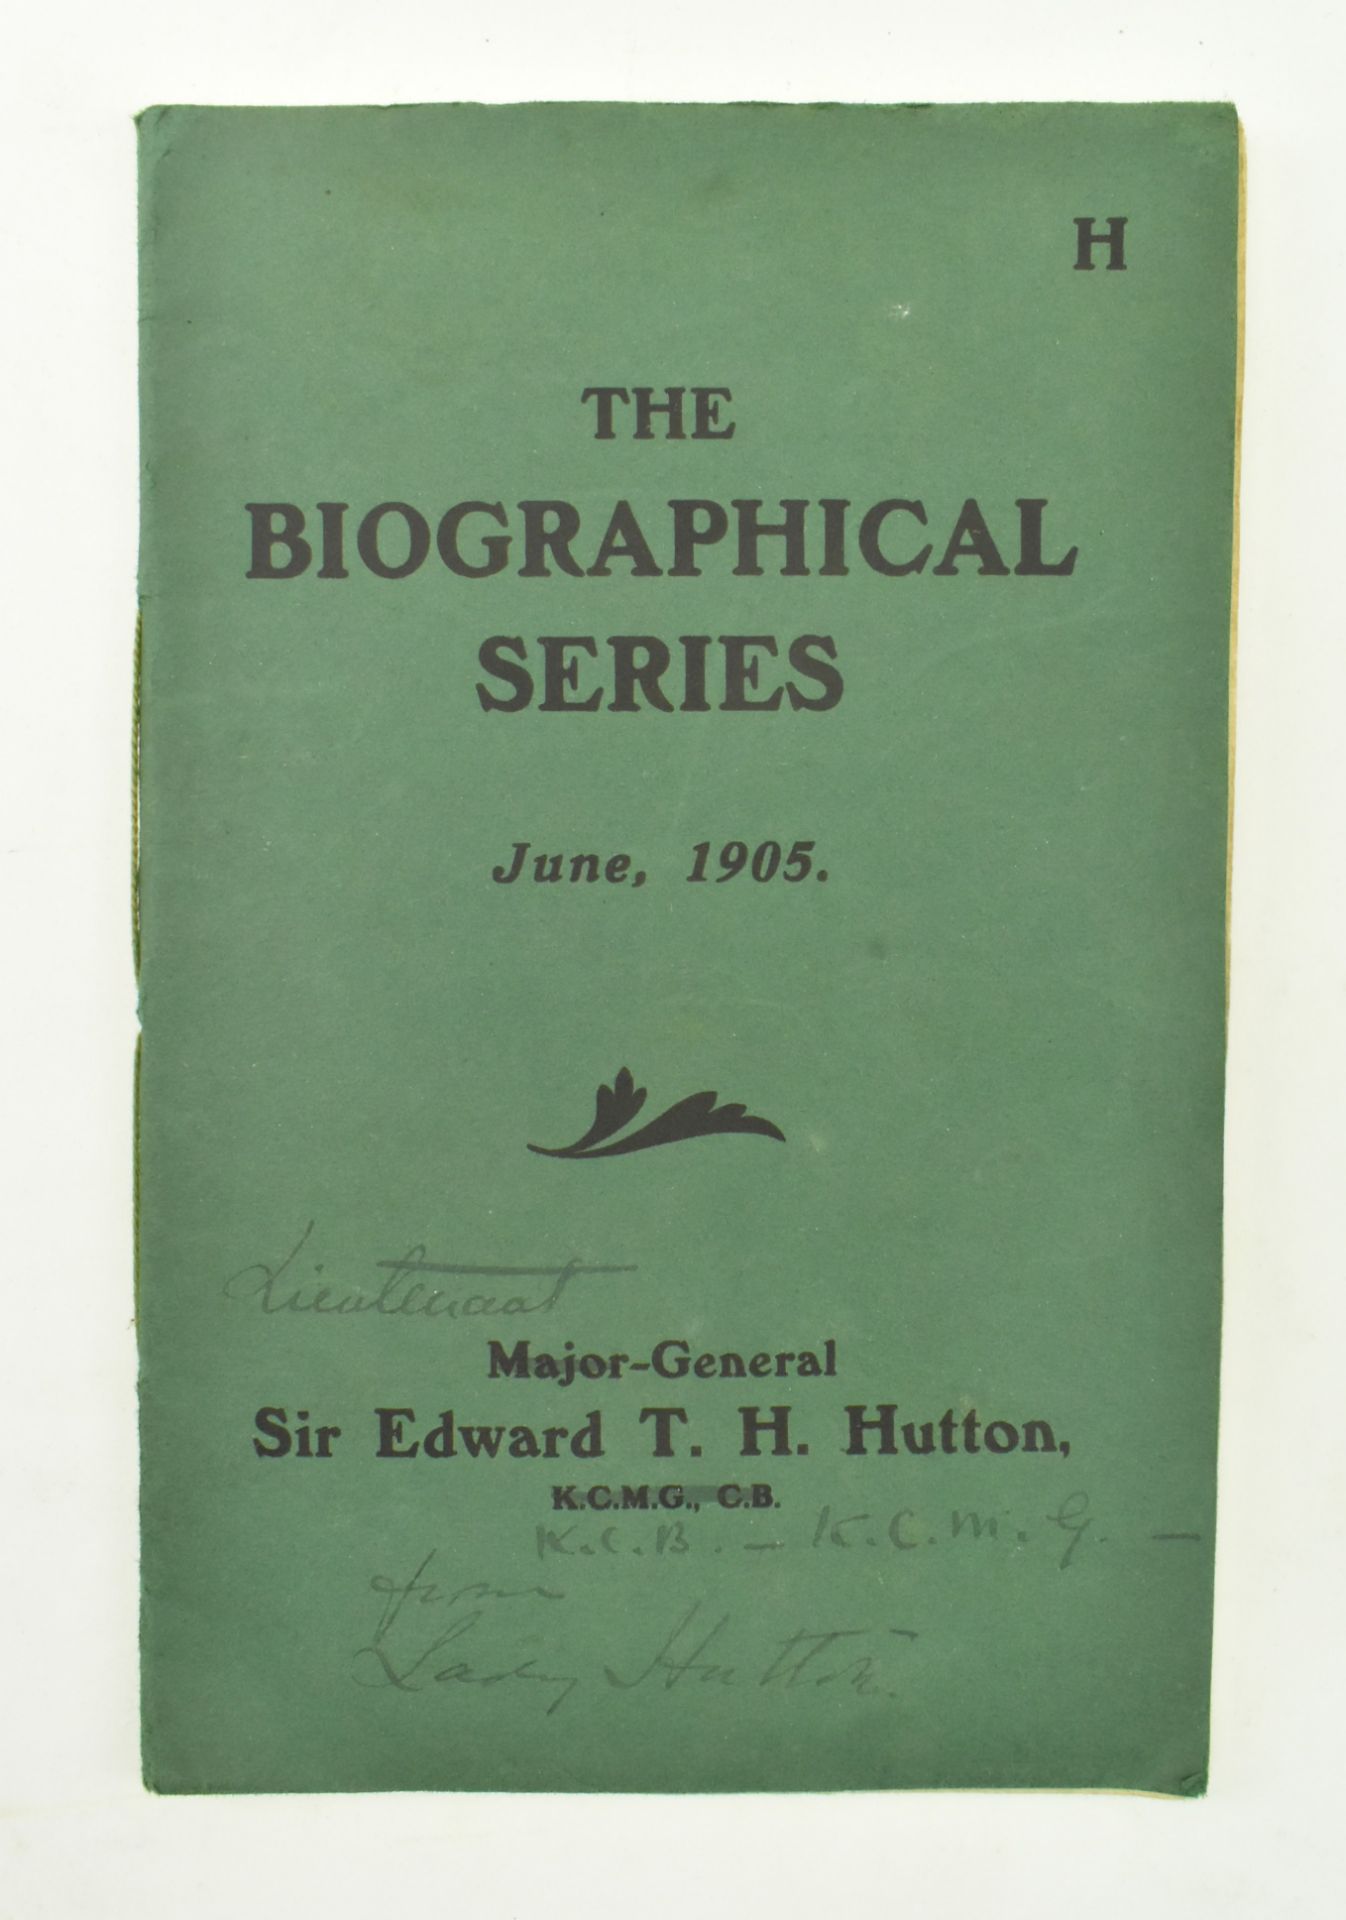 SIR EDWARD T. H. HUTTON BIOGRAPHY ANNOTATED BY LADY HUTTON